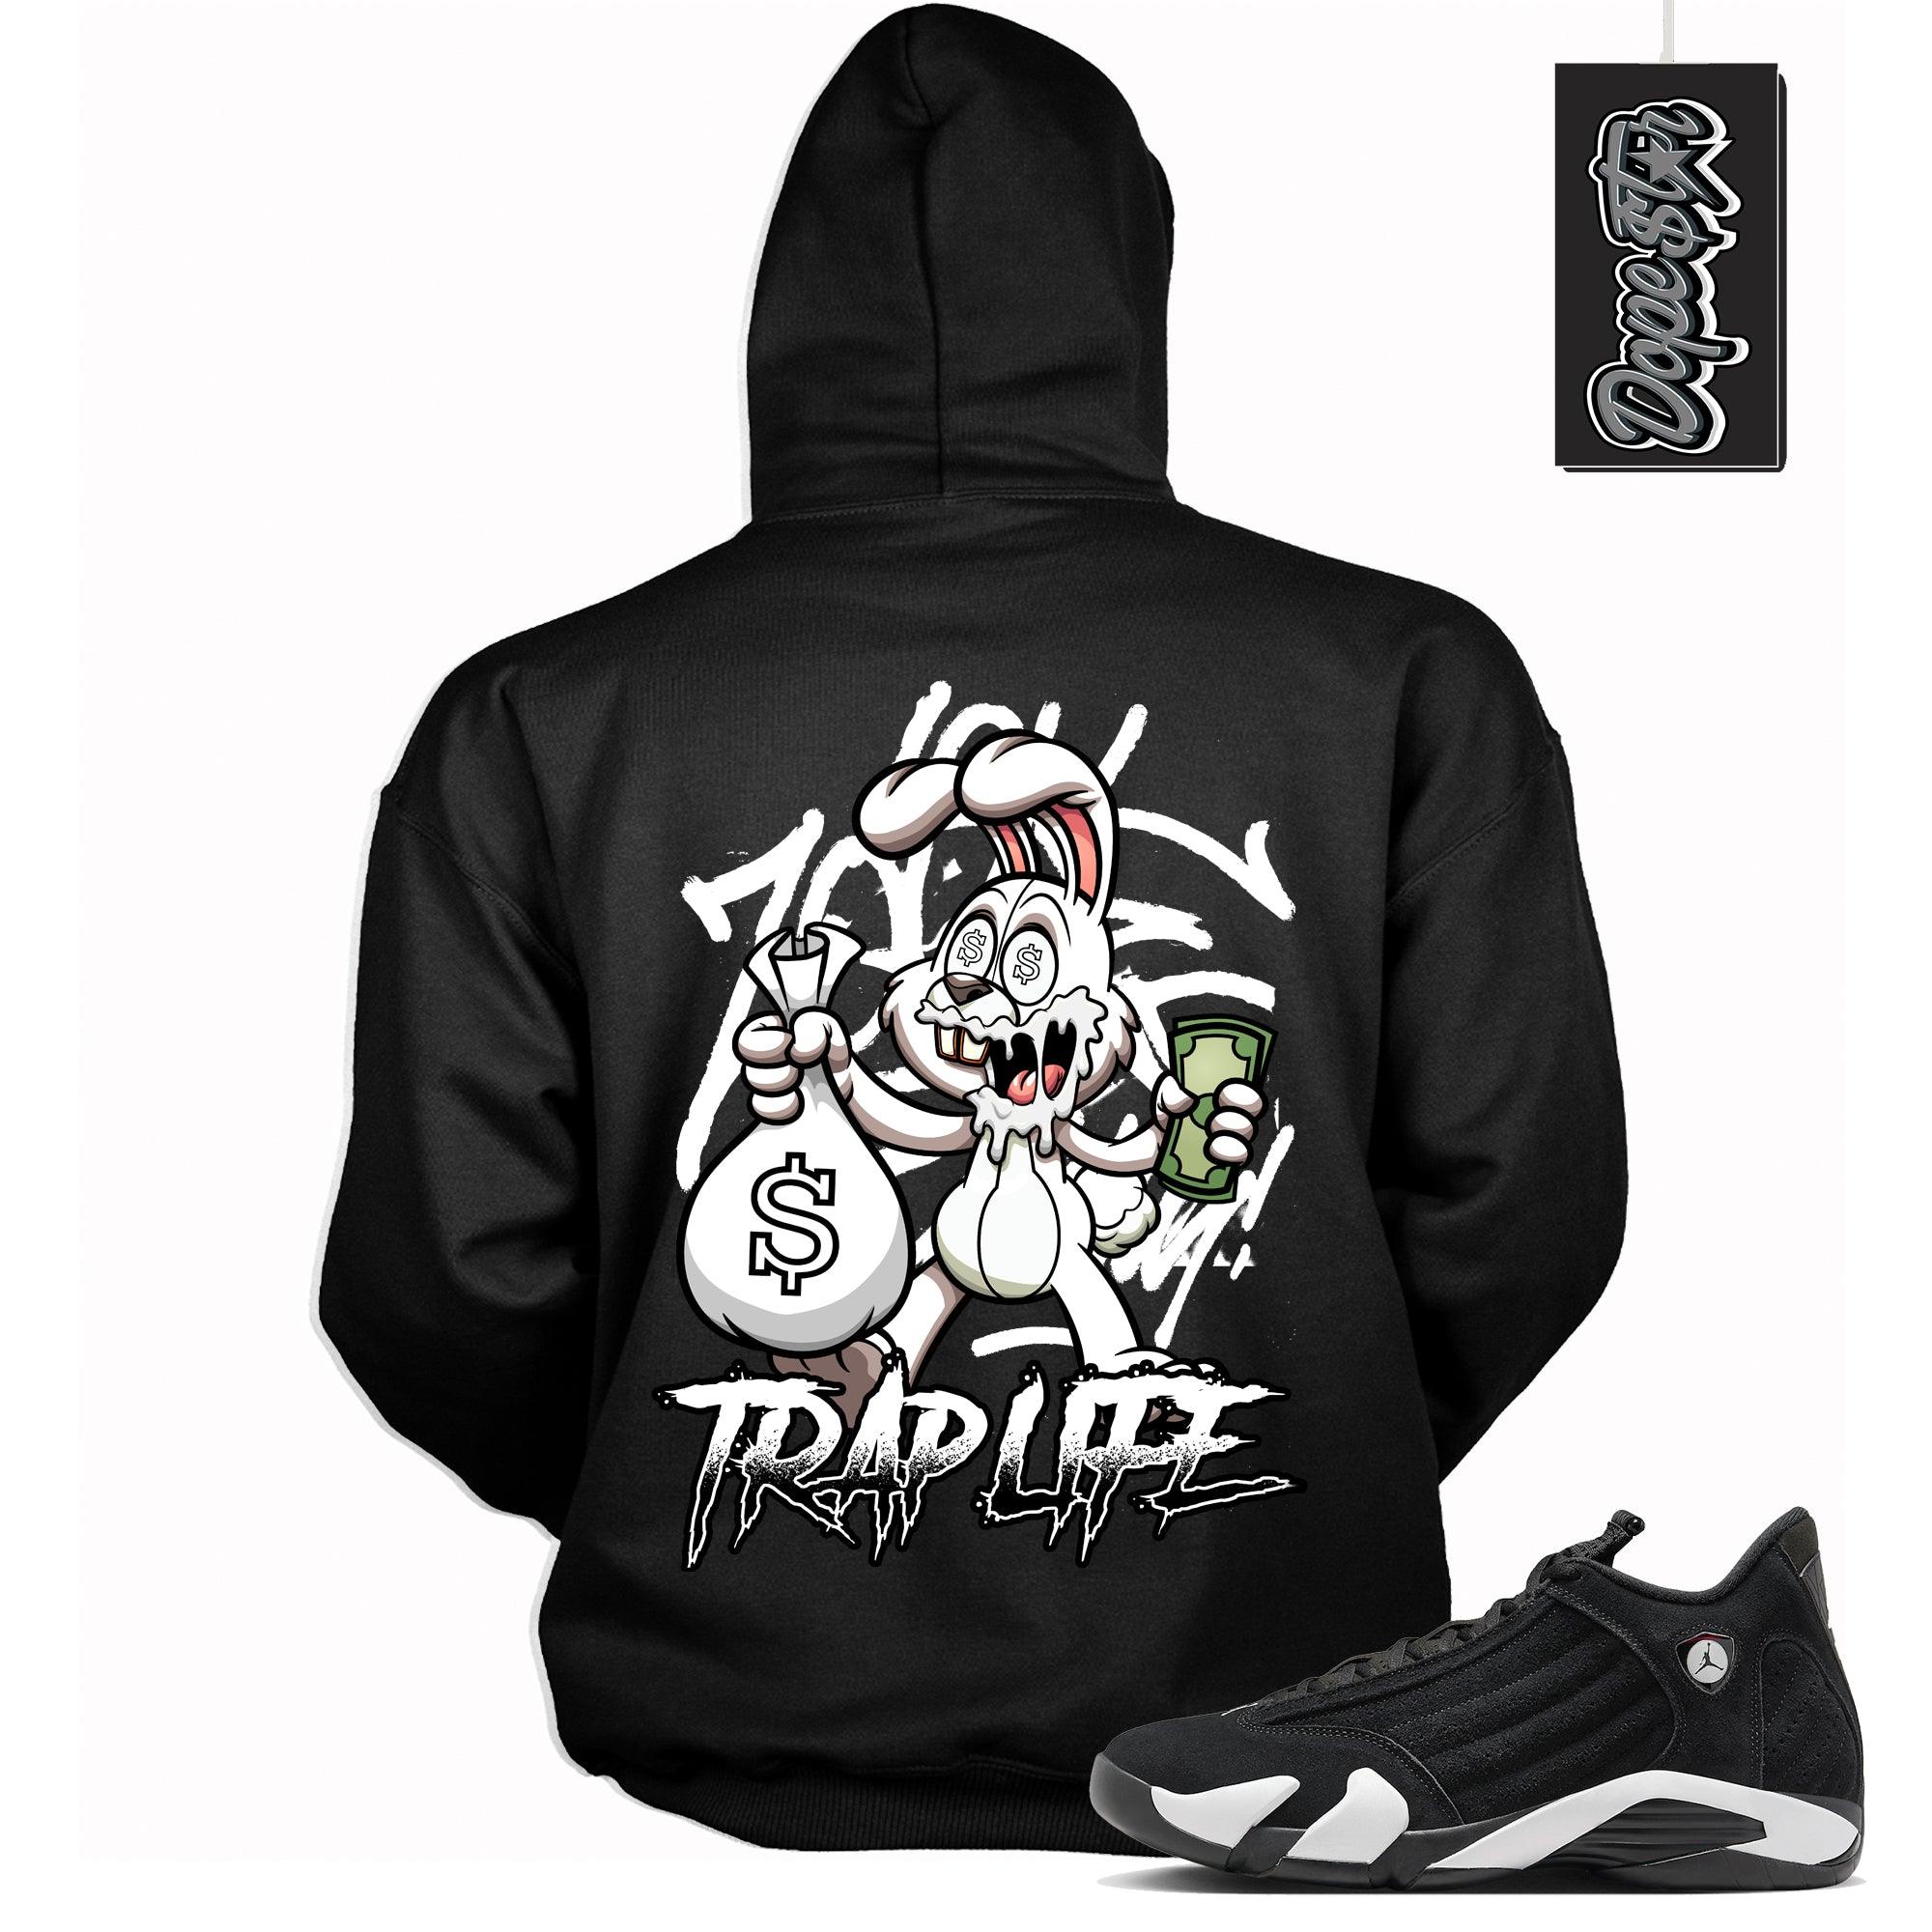 Cool Black Graphic Hoodie with “ Trap Life “ print, that perfectly matches Air Jordan 14 Black & White  sneakers